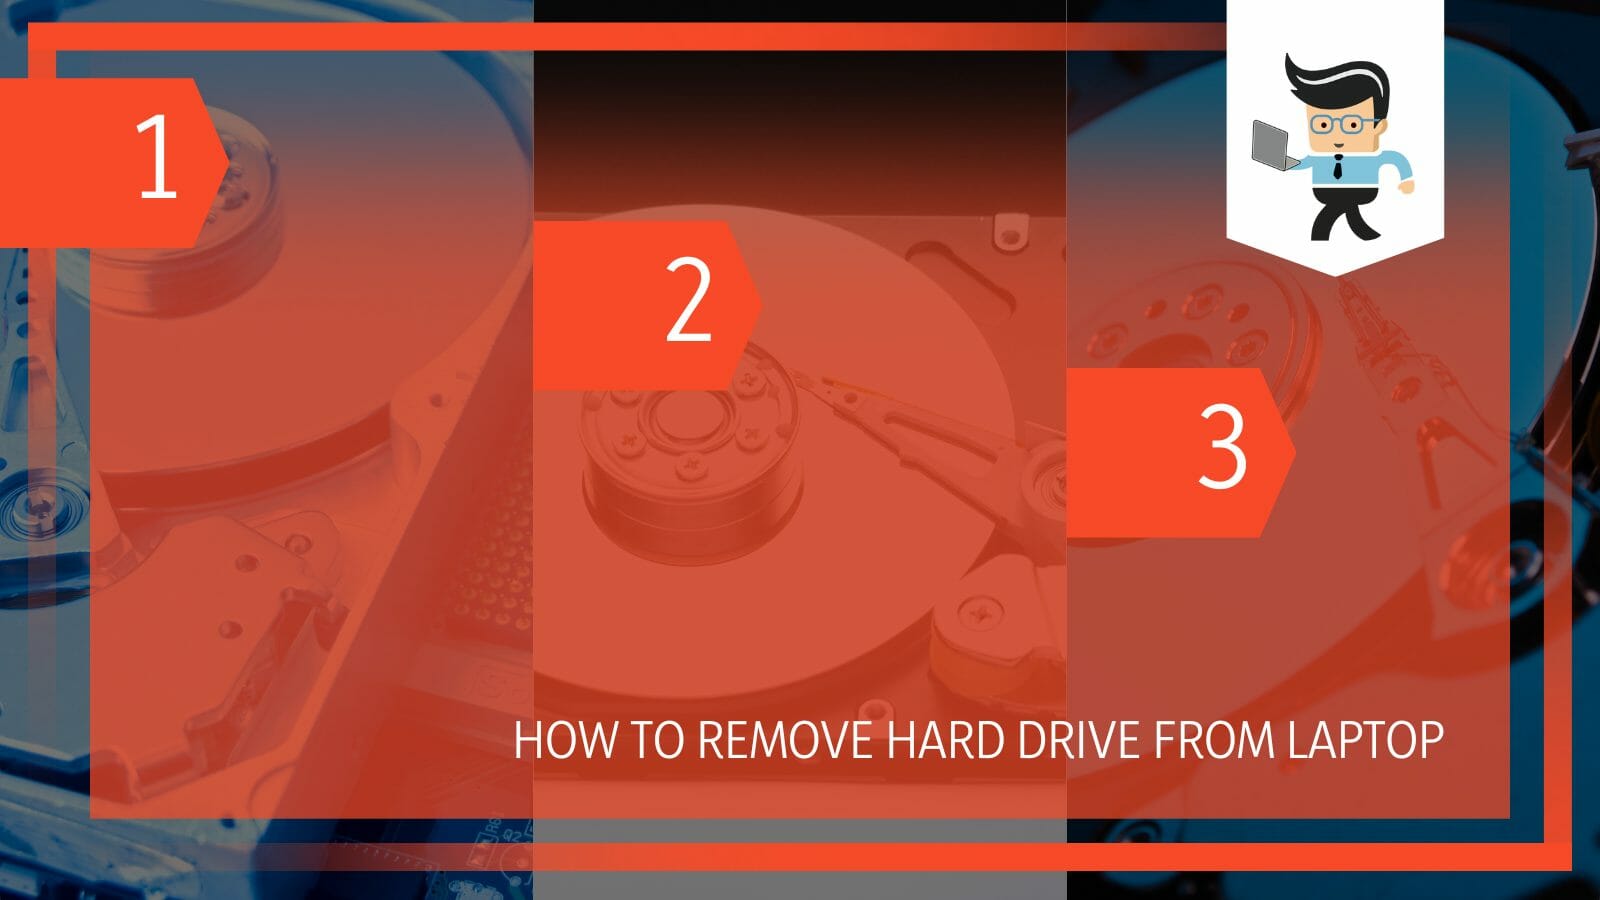 Remove Hard Drive From Laptop